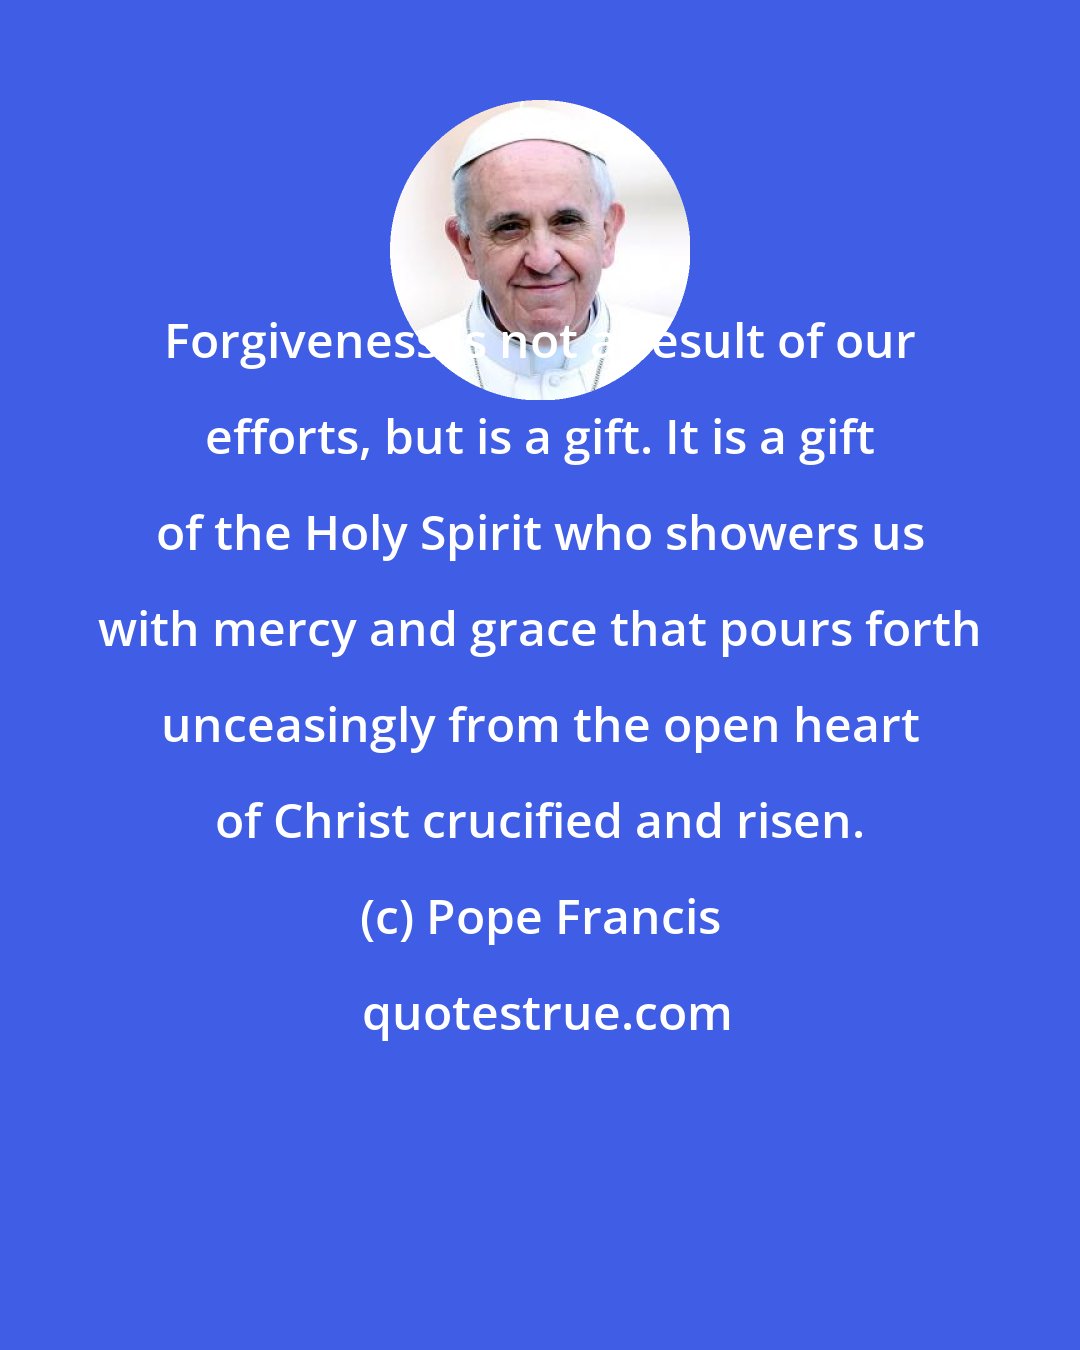 Pope Francis: Forgiveness is not a result of our efforts, but is a gift. It is a gift of the Holy Spirit who showers us with mercy and grace that pours forth unceasingly from the open heart of Christ crucified and risen.